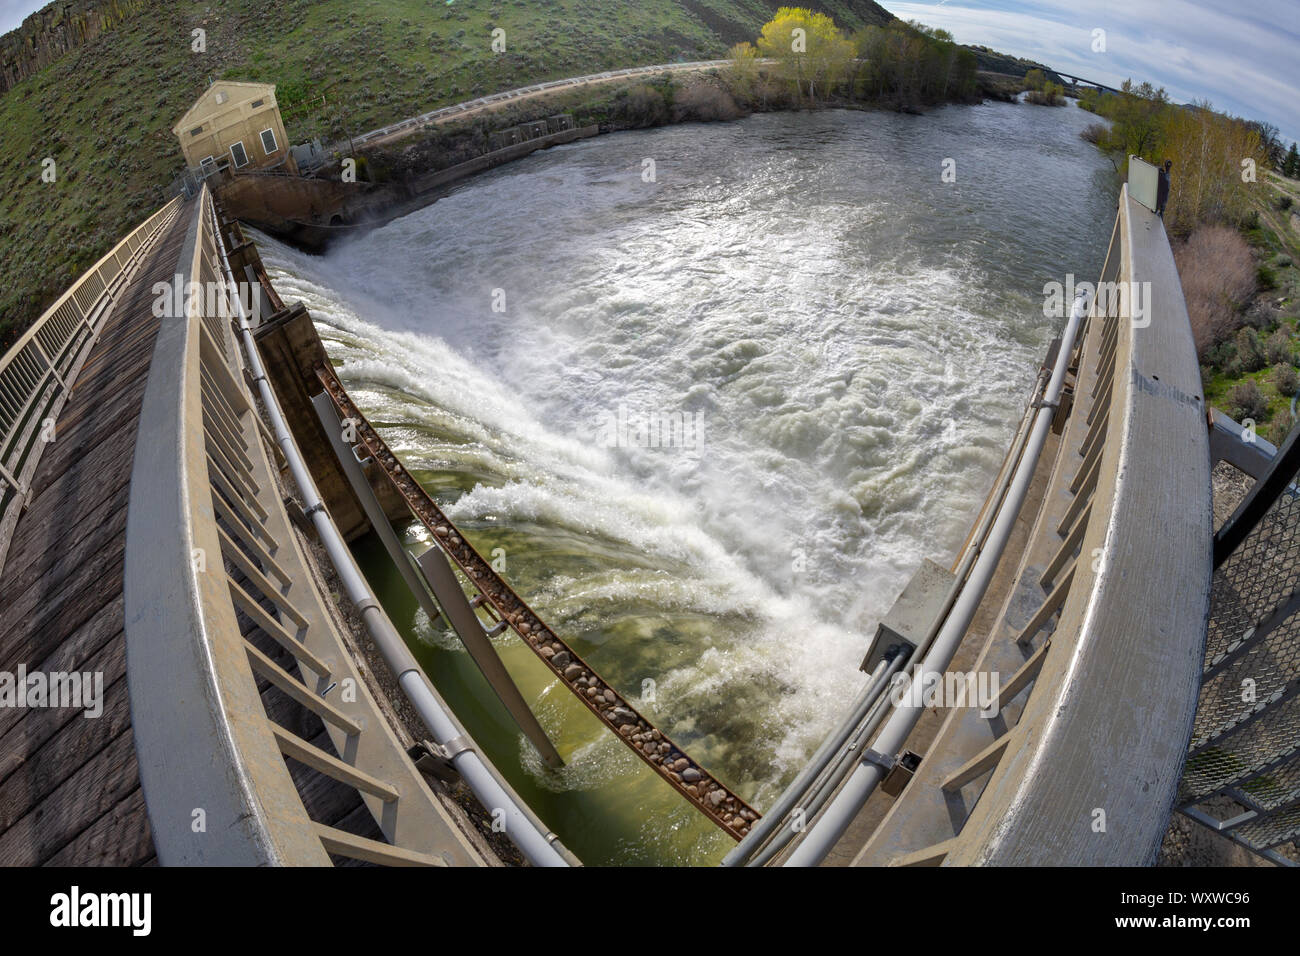 Hydroelectric dam providing energy to the city Stock Photo